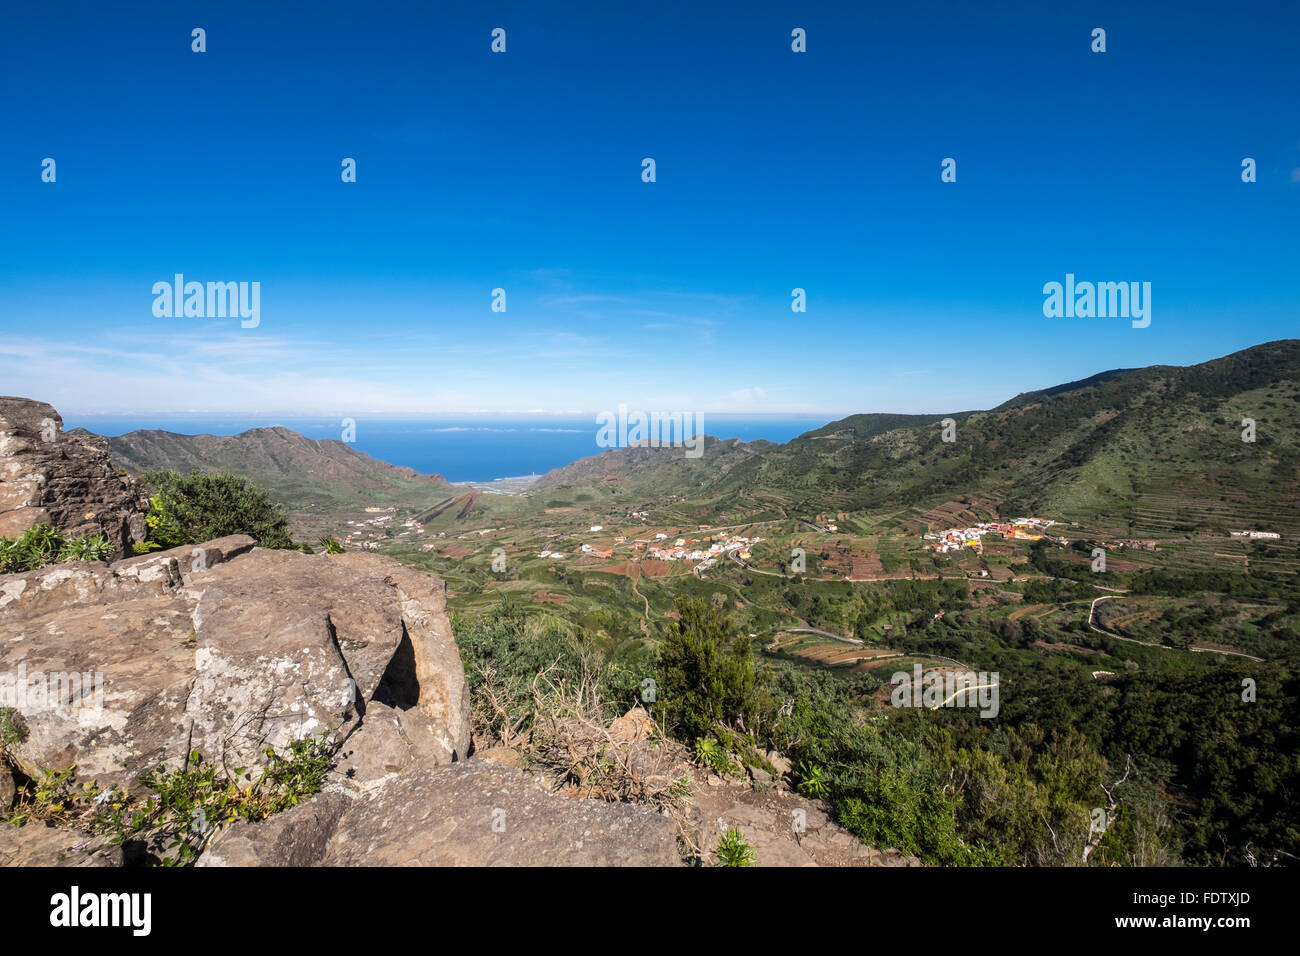 Views over the valley of Palmar in Buenavista del Norte from a walking trail on the ridge. Tenerife, canary Islands, Spain. Stock Photo